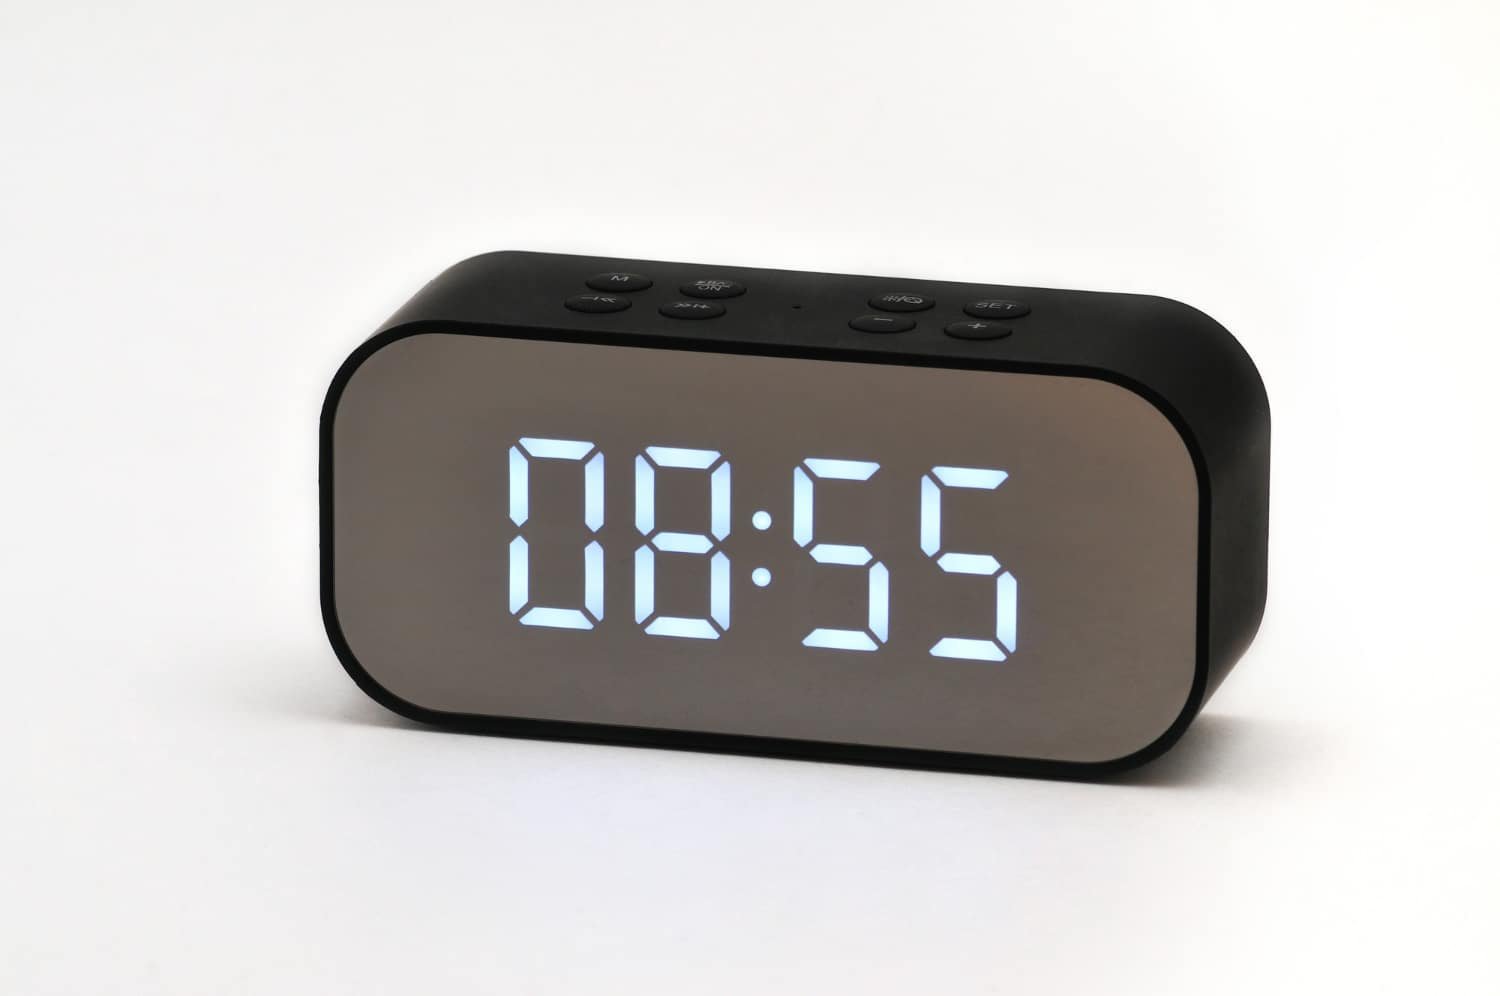 You are currently viewing Loftie: Transforming Your Sleep with the Smart Alarm Clock